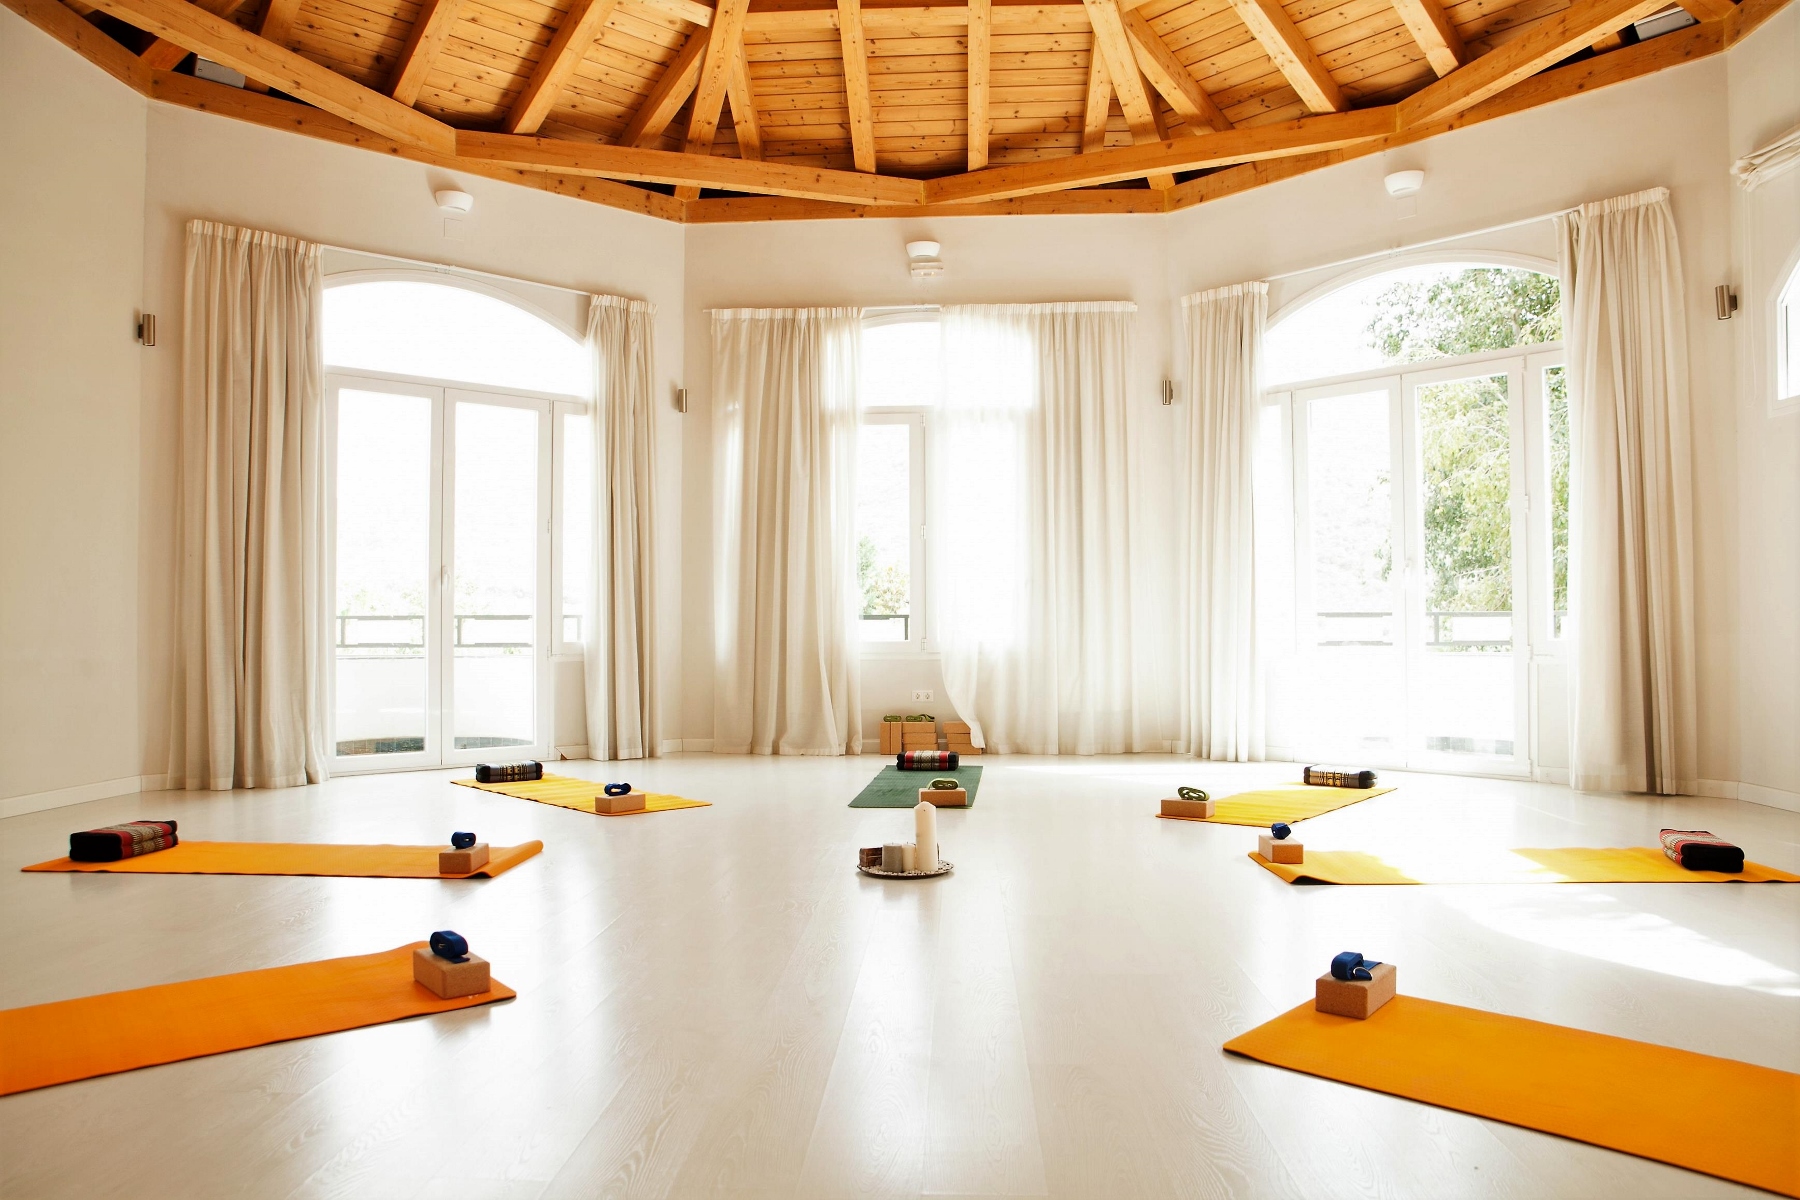 Yoga holiday with Steve in Spain - warmth, good food, relaxation - small group